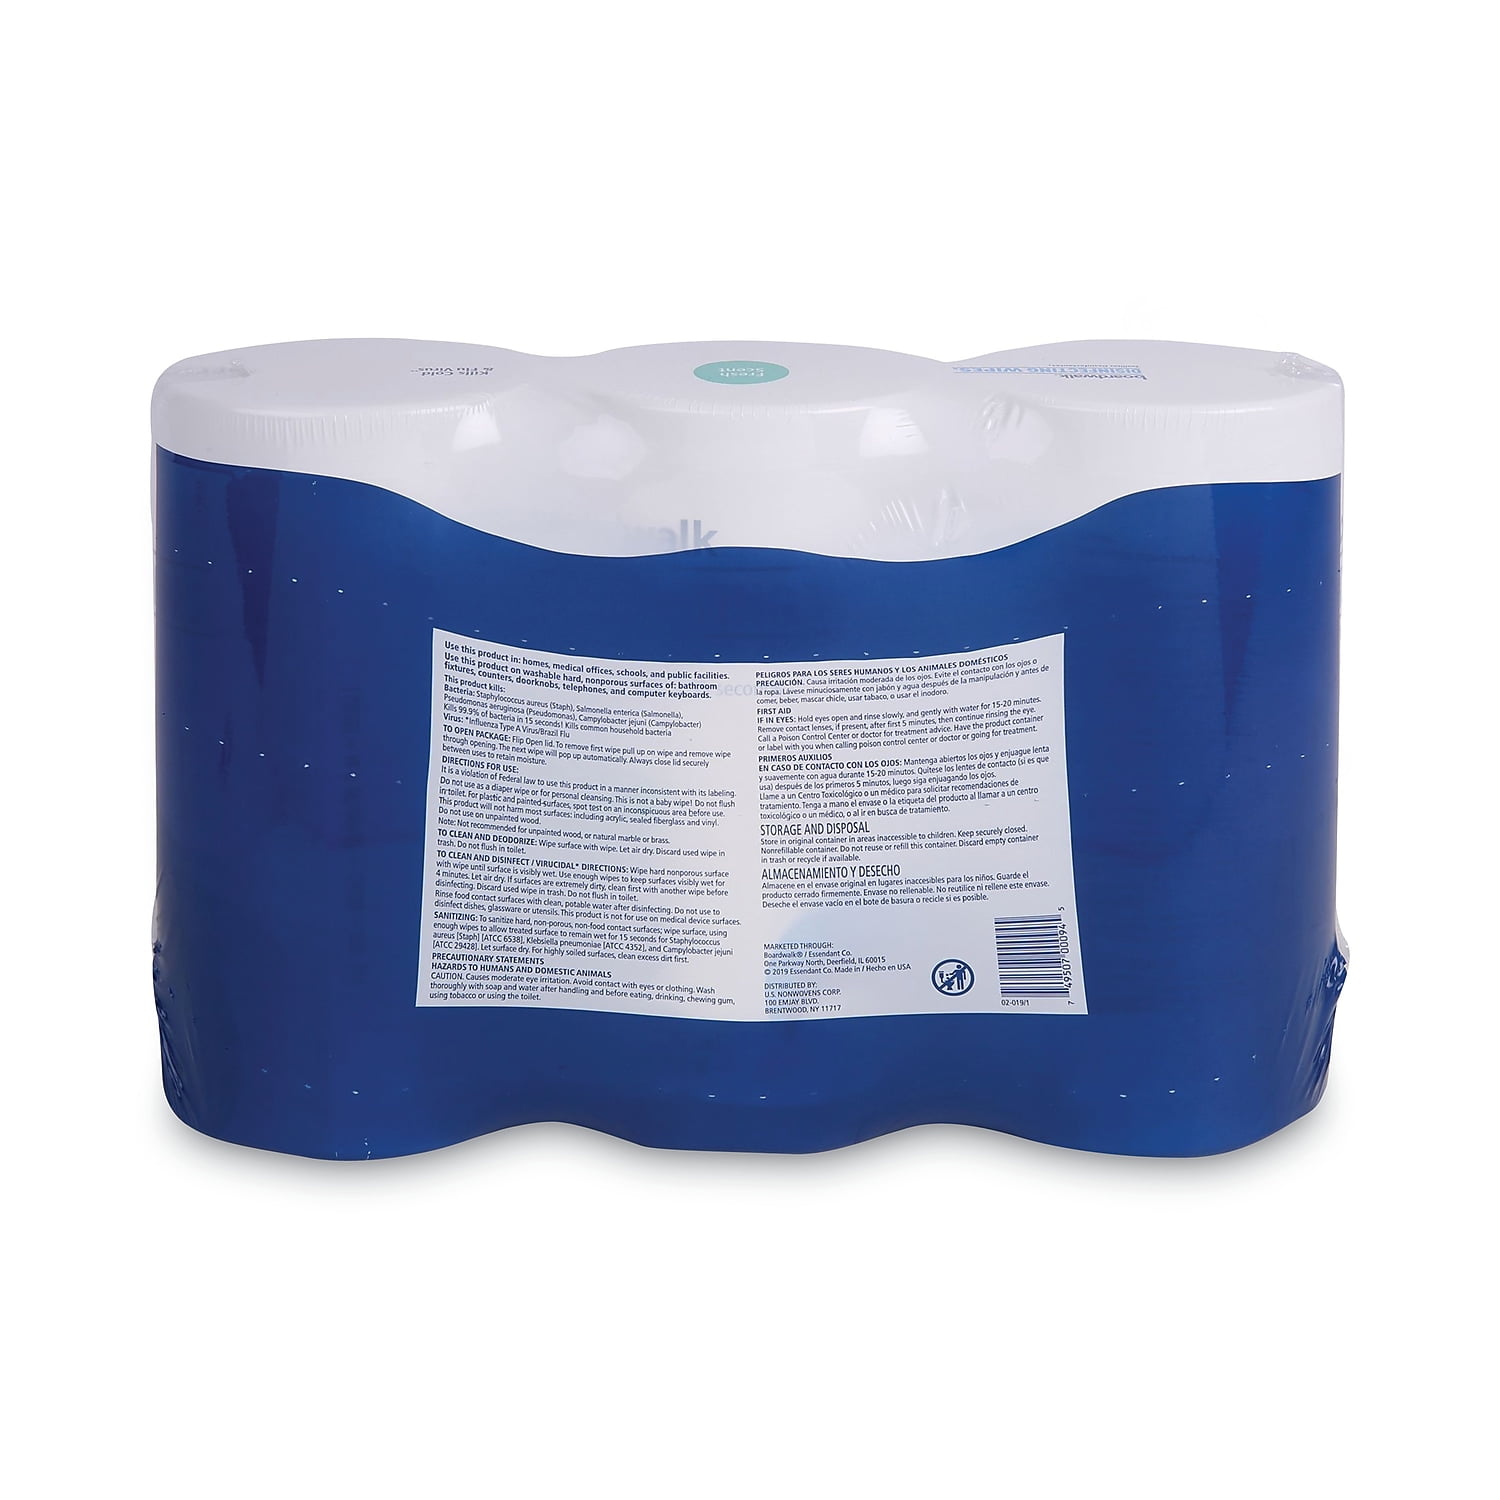 Simple Green All Purpose Cleaning Wipes, White, Canister, polypropylene, 75  Wipes (3810000613351)